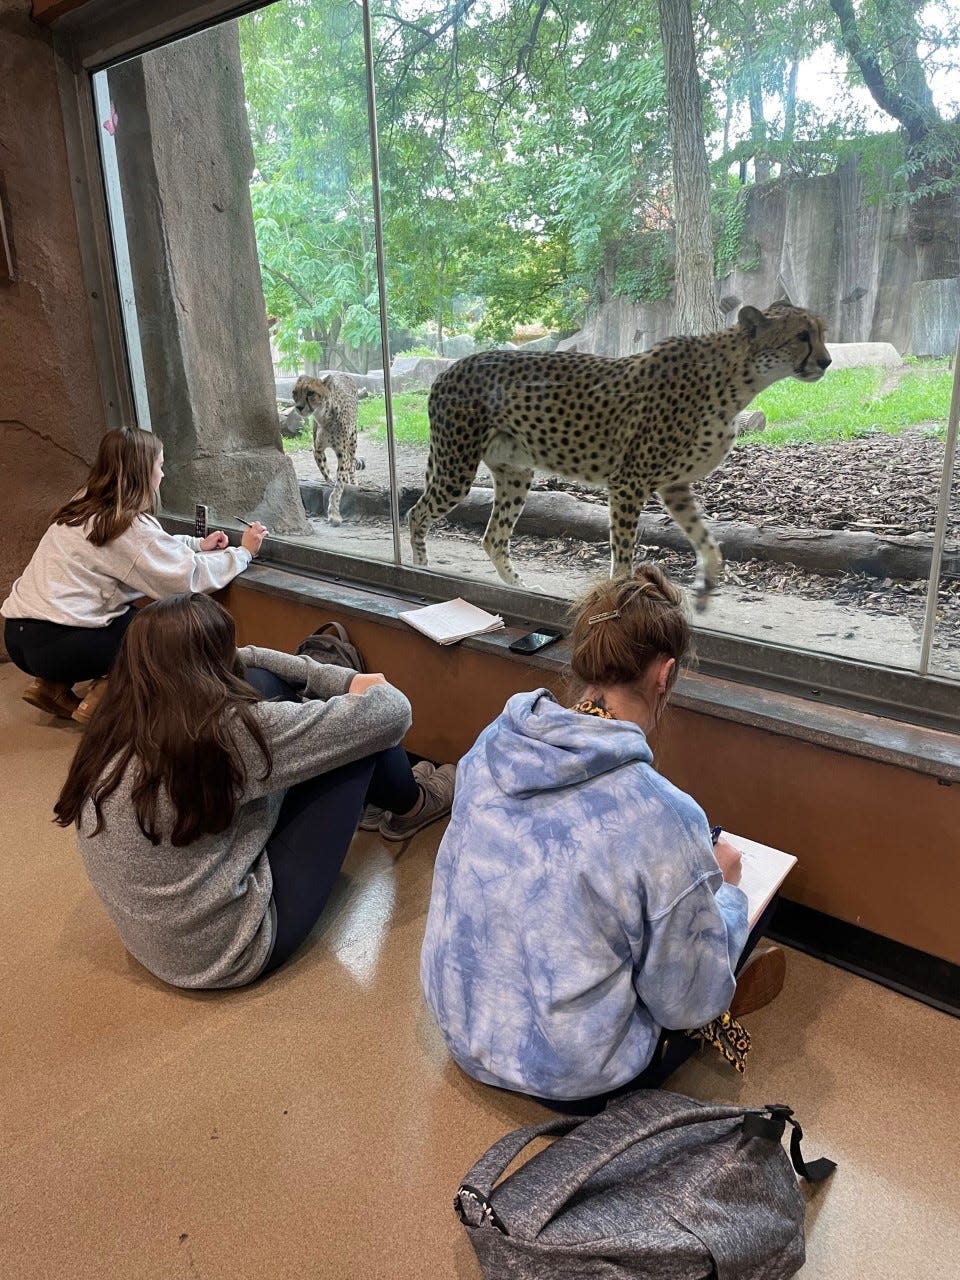 Carroll University students Francesca Grimes, Danielle Geissberger and Kaitlin Knas observe Milwaukee County Zoo cheetahs as part of a research project for the university's animal behavior program.